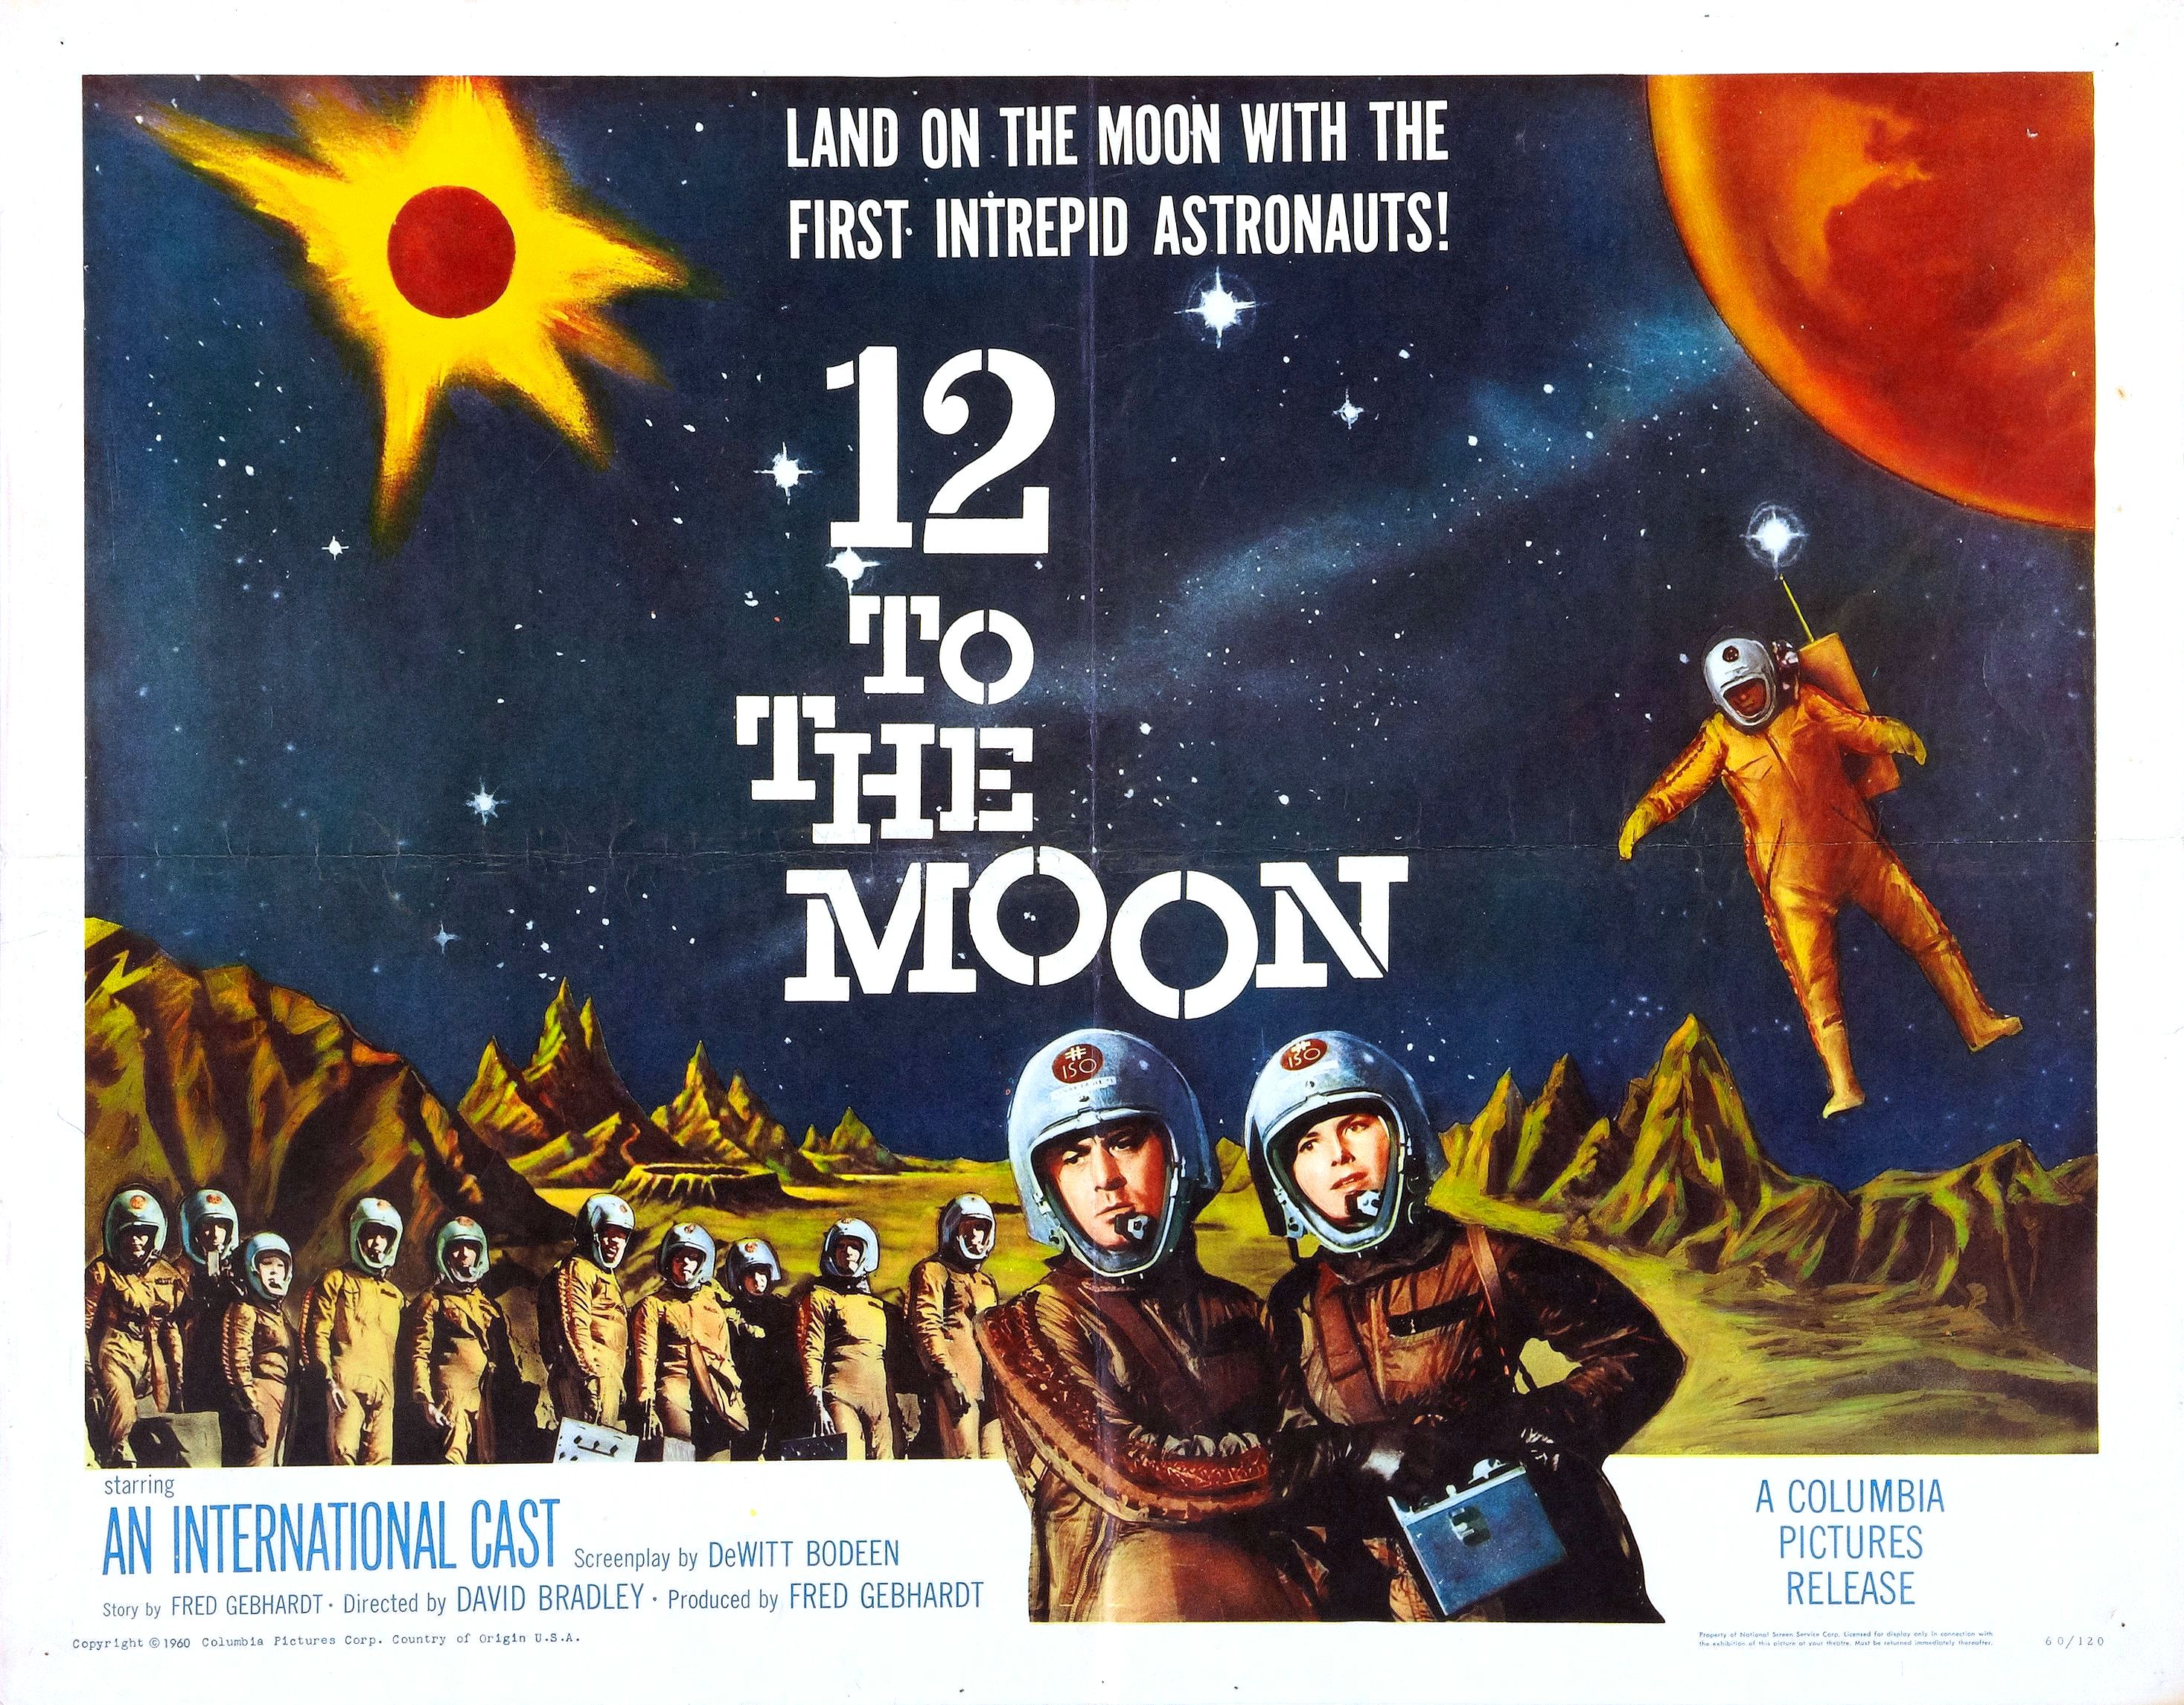 12 to the moon (1960) - Land On The Moon With The First Intrepid Astronauts! 12 To Tie Moon An International Cast A Columbia Pictures Release Fred GEBHAROTDirected to David Bradley. Produced by Fred Gebhardt